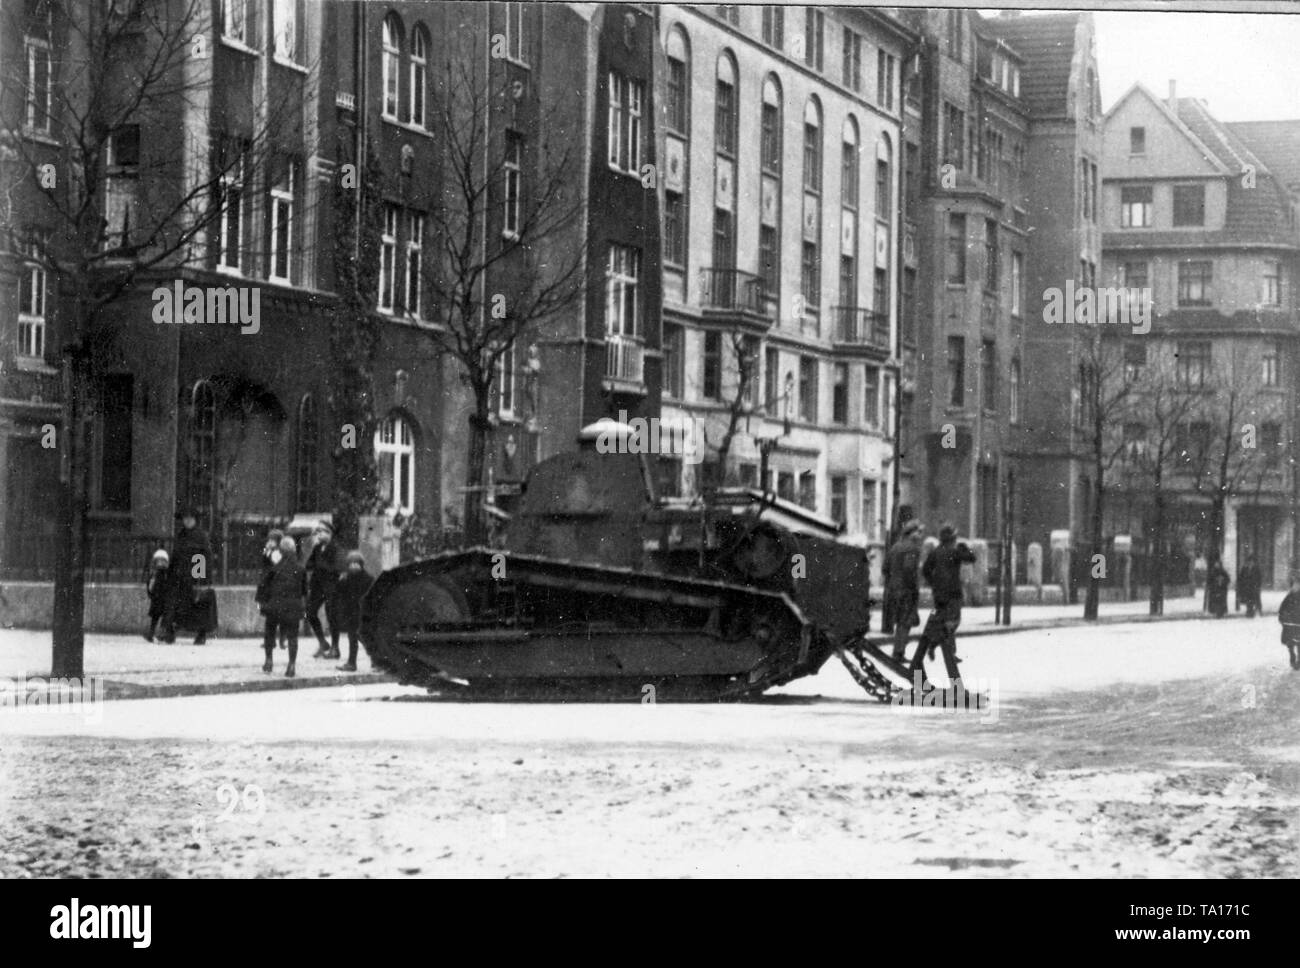 A French tank of the occupation forces shields soldiers in the Lindemannstrasse of a German city in the Ruhr area. Stock Photo